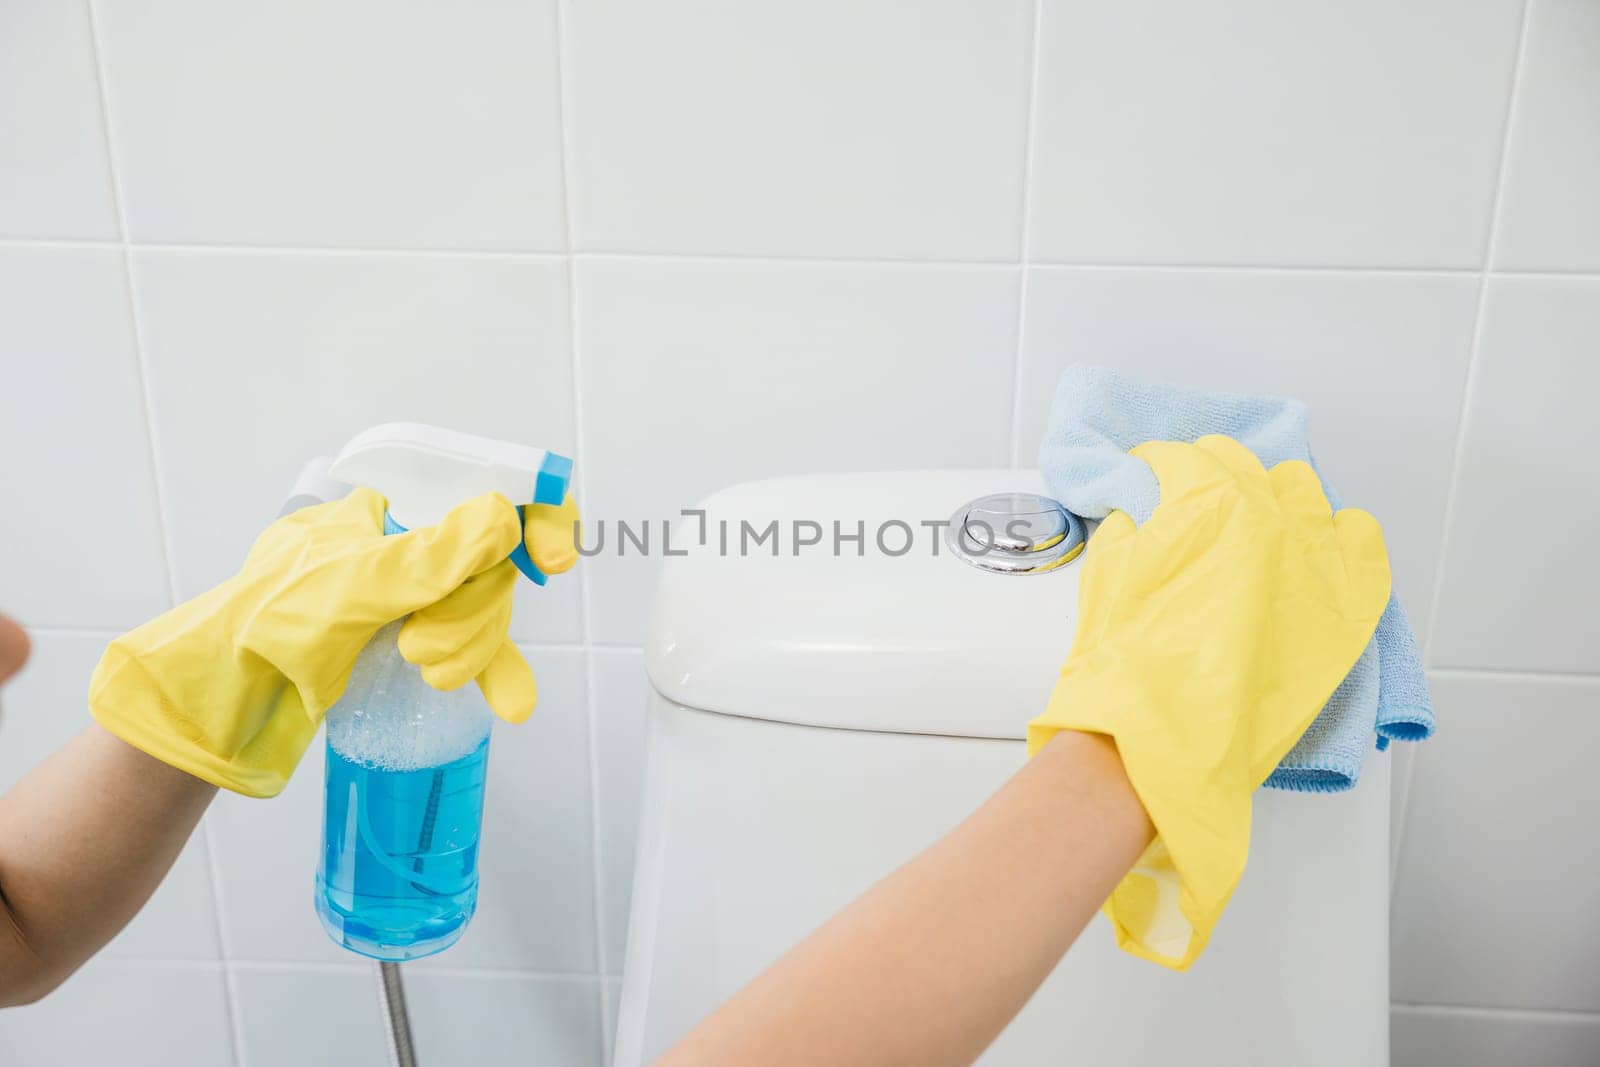 Maid in yellow gloves meticulously cleans the toilet seat in restroom using cloth. Her focus on purity and hygiene embodies the housekeeper dedication to bathroom care. Housekeeper healthcare concept